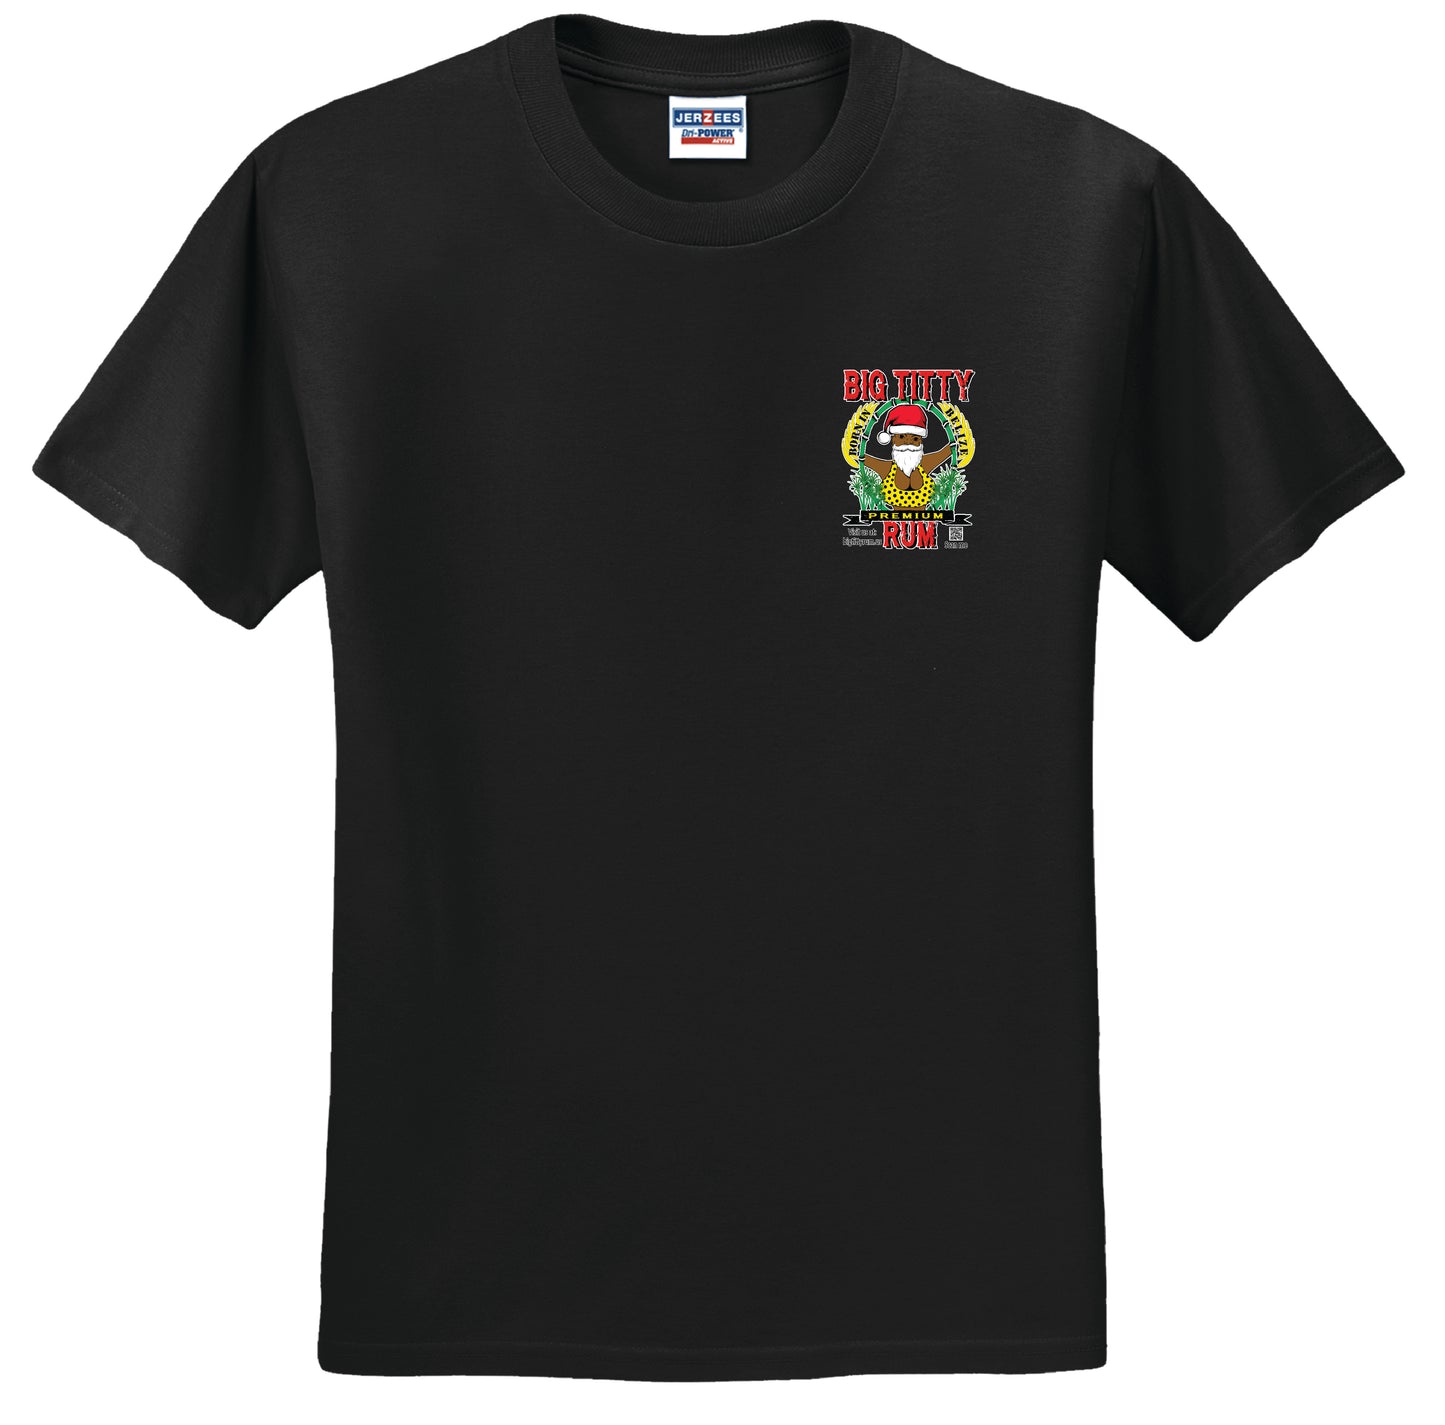 Big Titty Rum Santa T shirt - Logo small on front and large on back